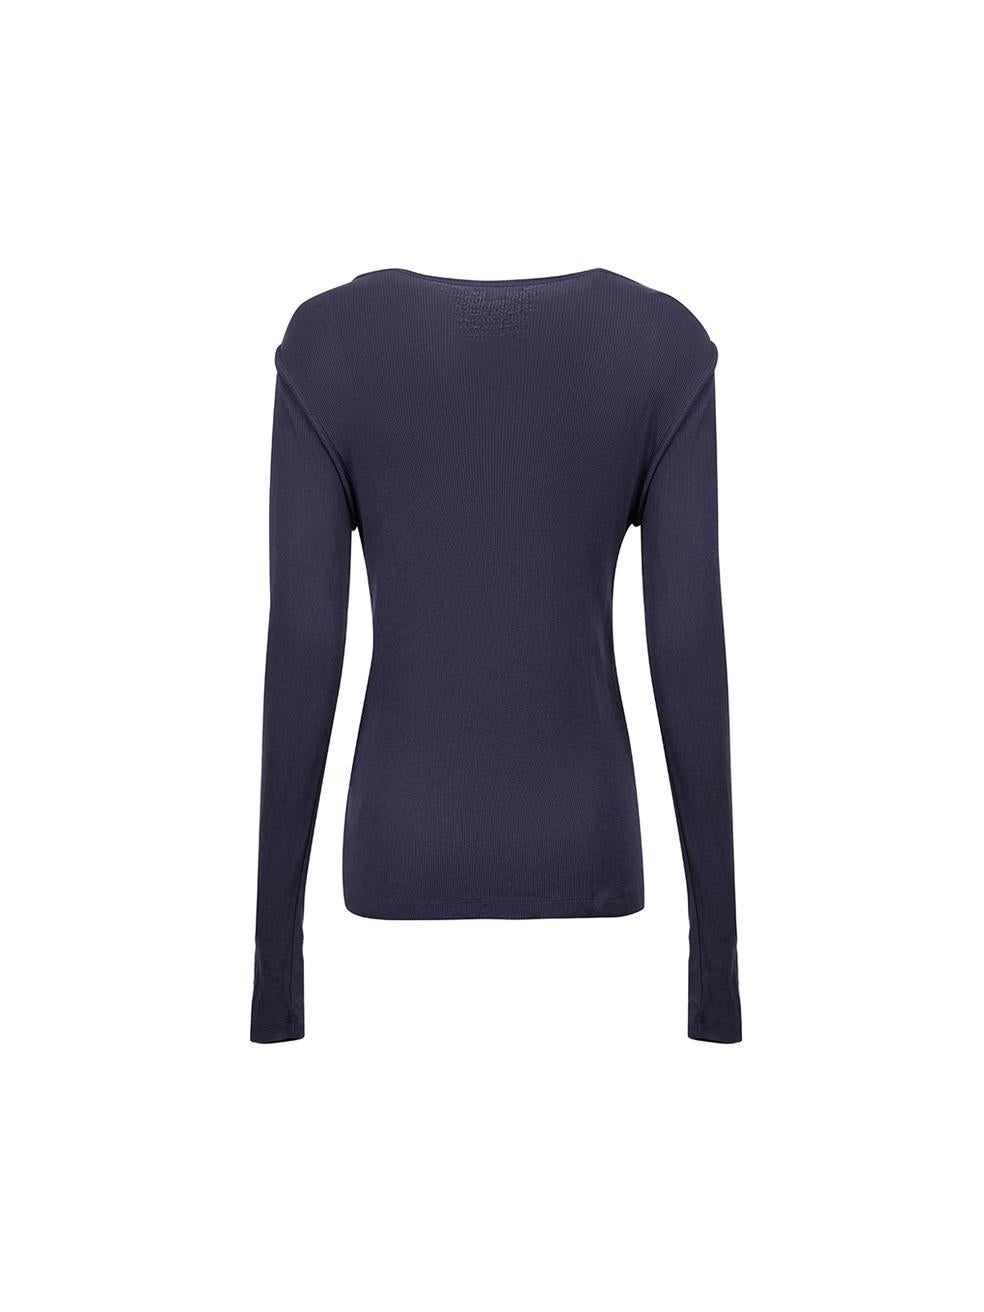 Theory Navy Blue Light Knit Jumper Size M In Good Condition For Sale In London, GB